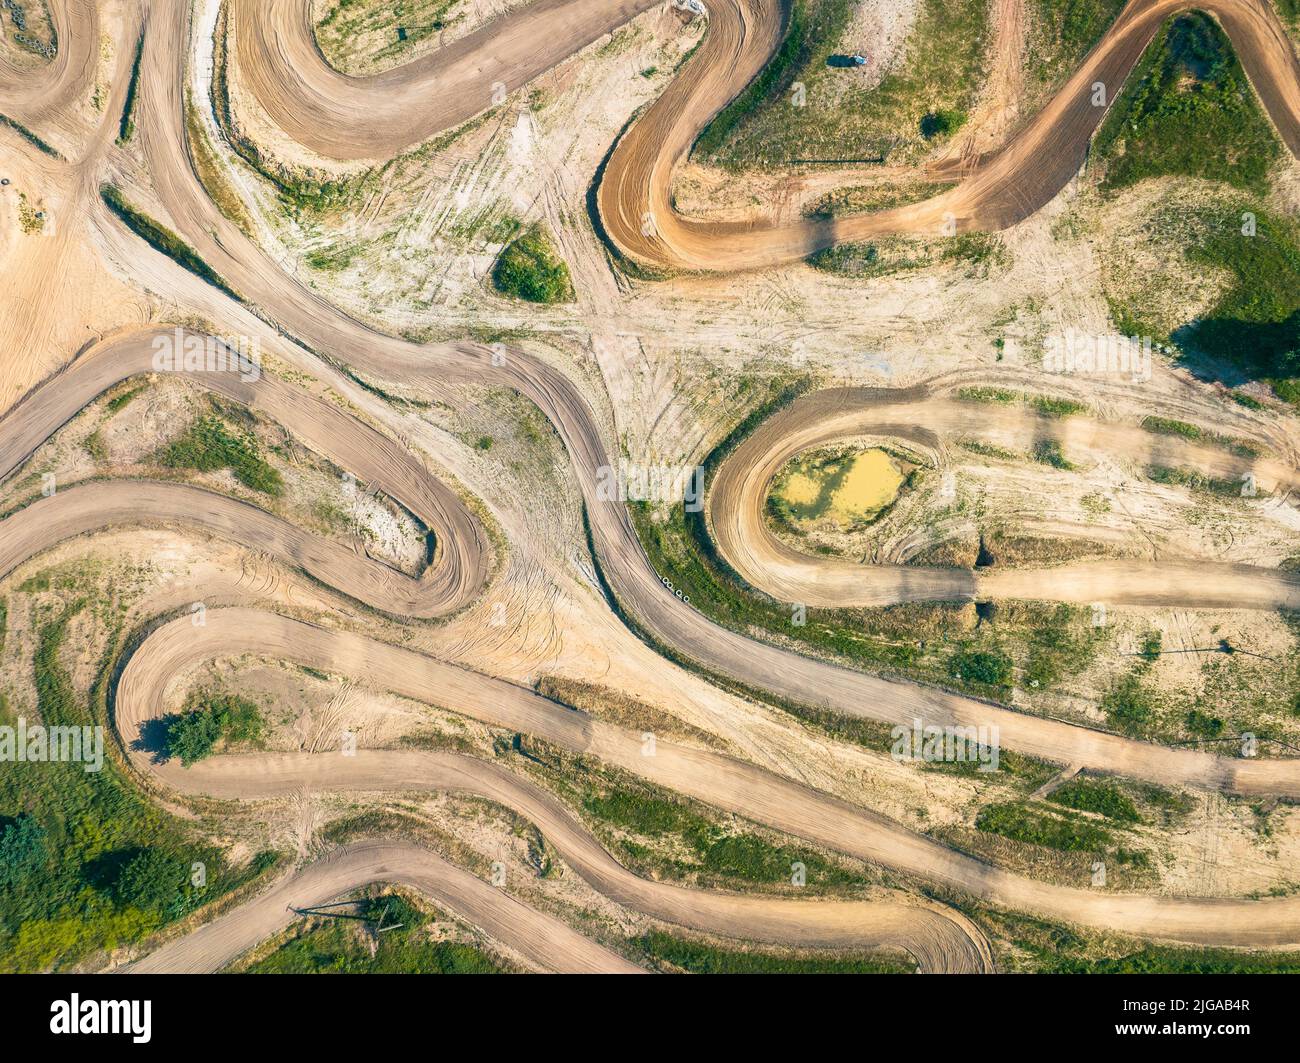 Motocross track in the middle of a green countryside. Aerial view. Stock Photo